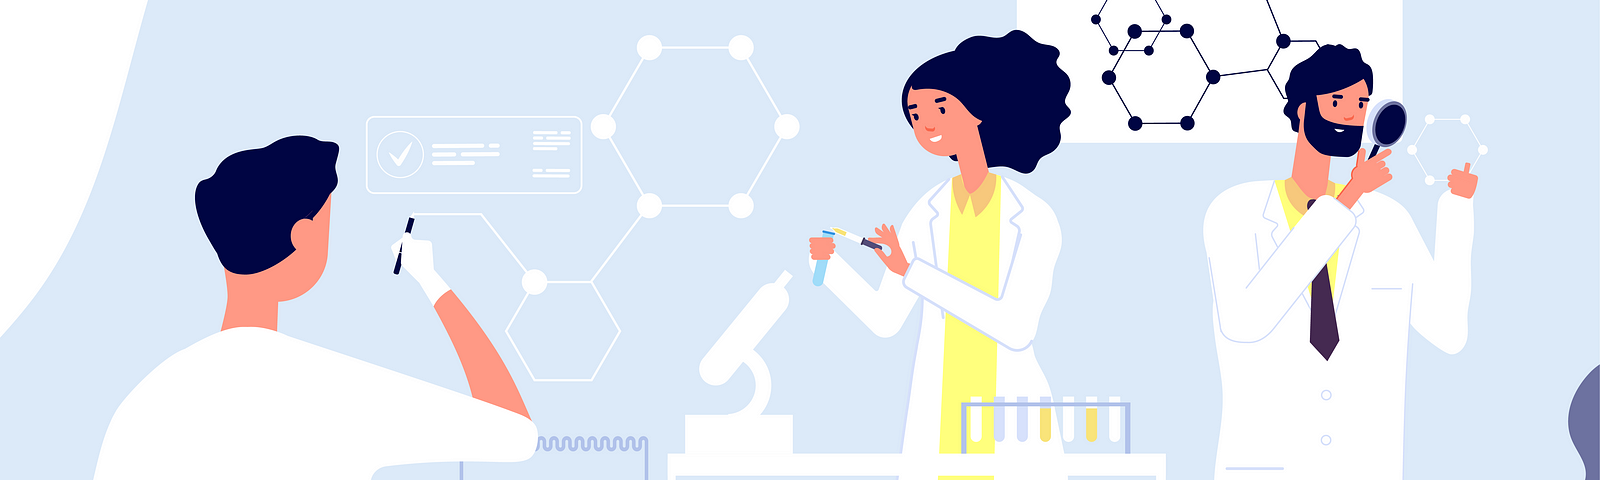 Innovating drug development with blockchain and AI